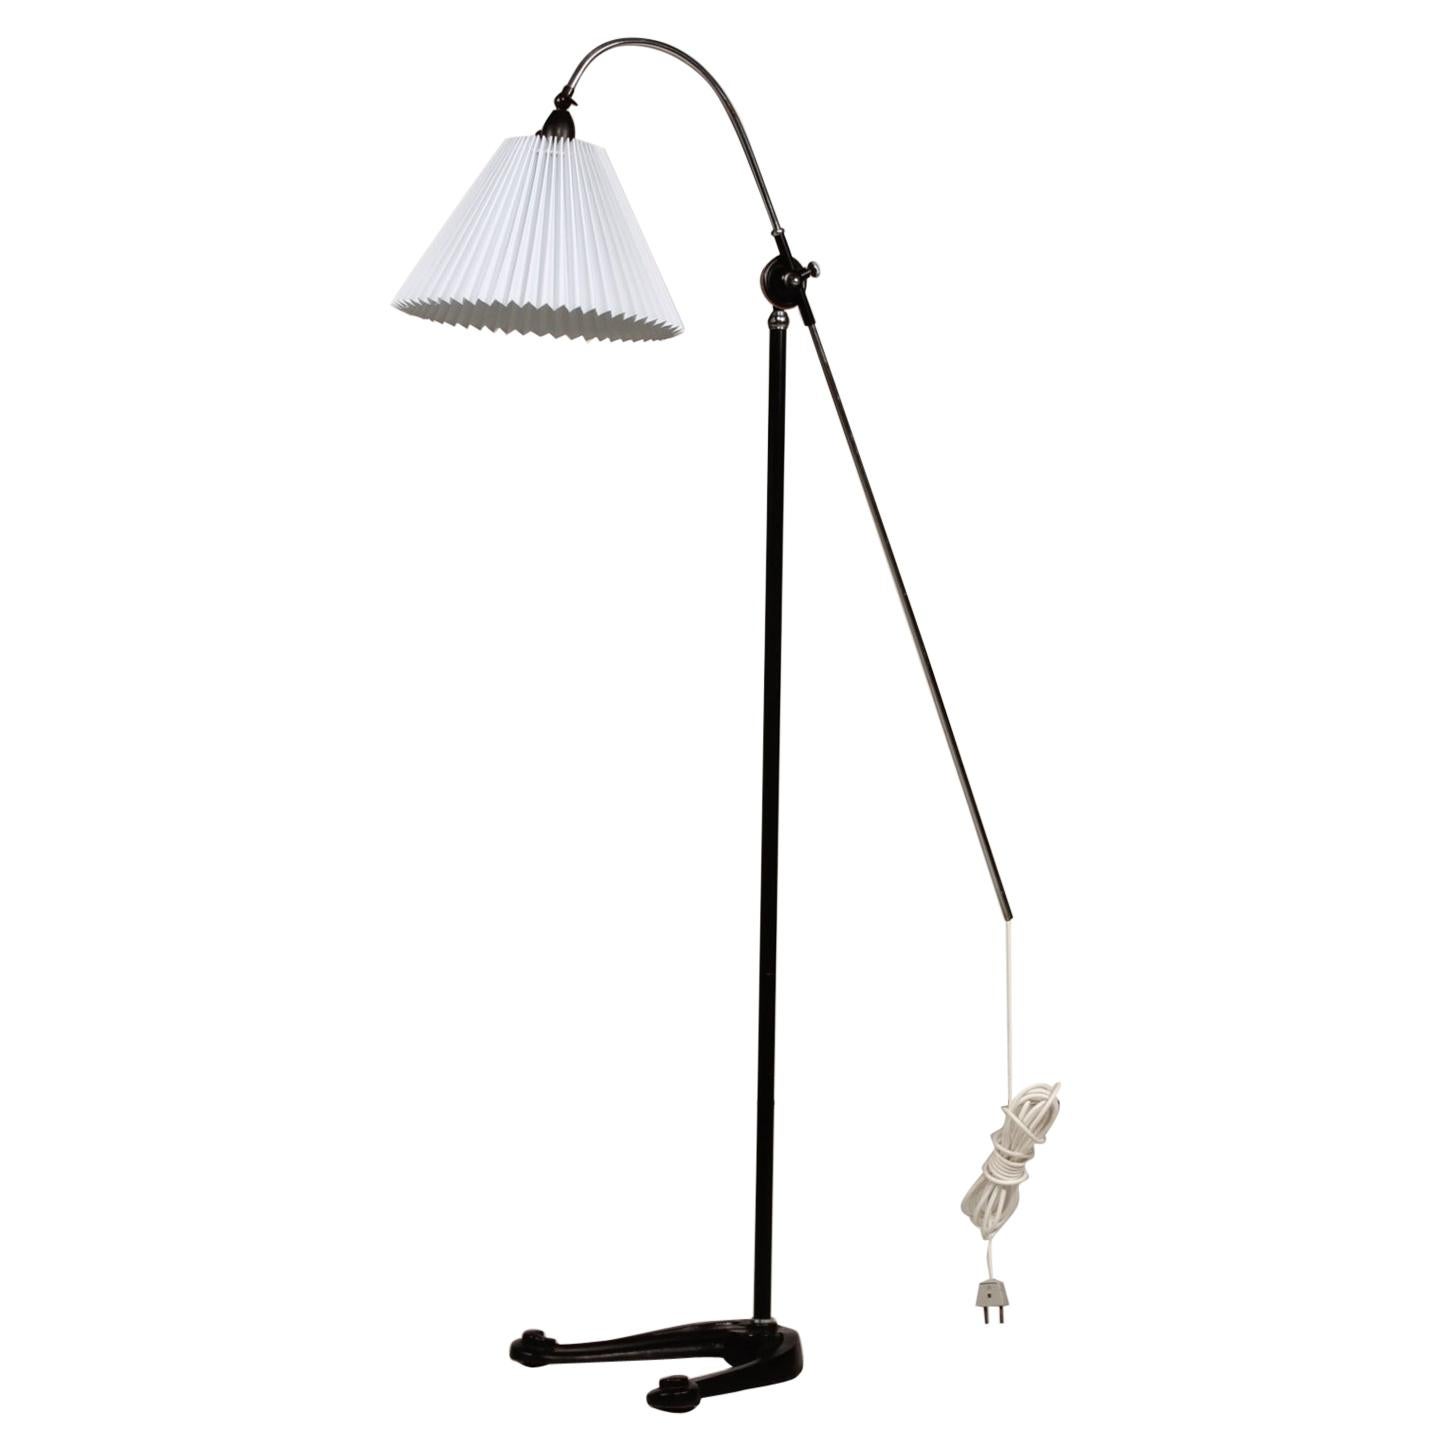 Danish Modern 1950s Adjustable Floor Lamp with Cast Iron Base and New Shade For Sale